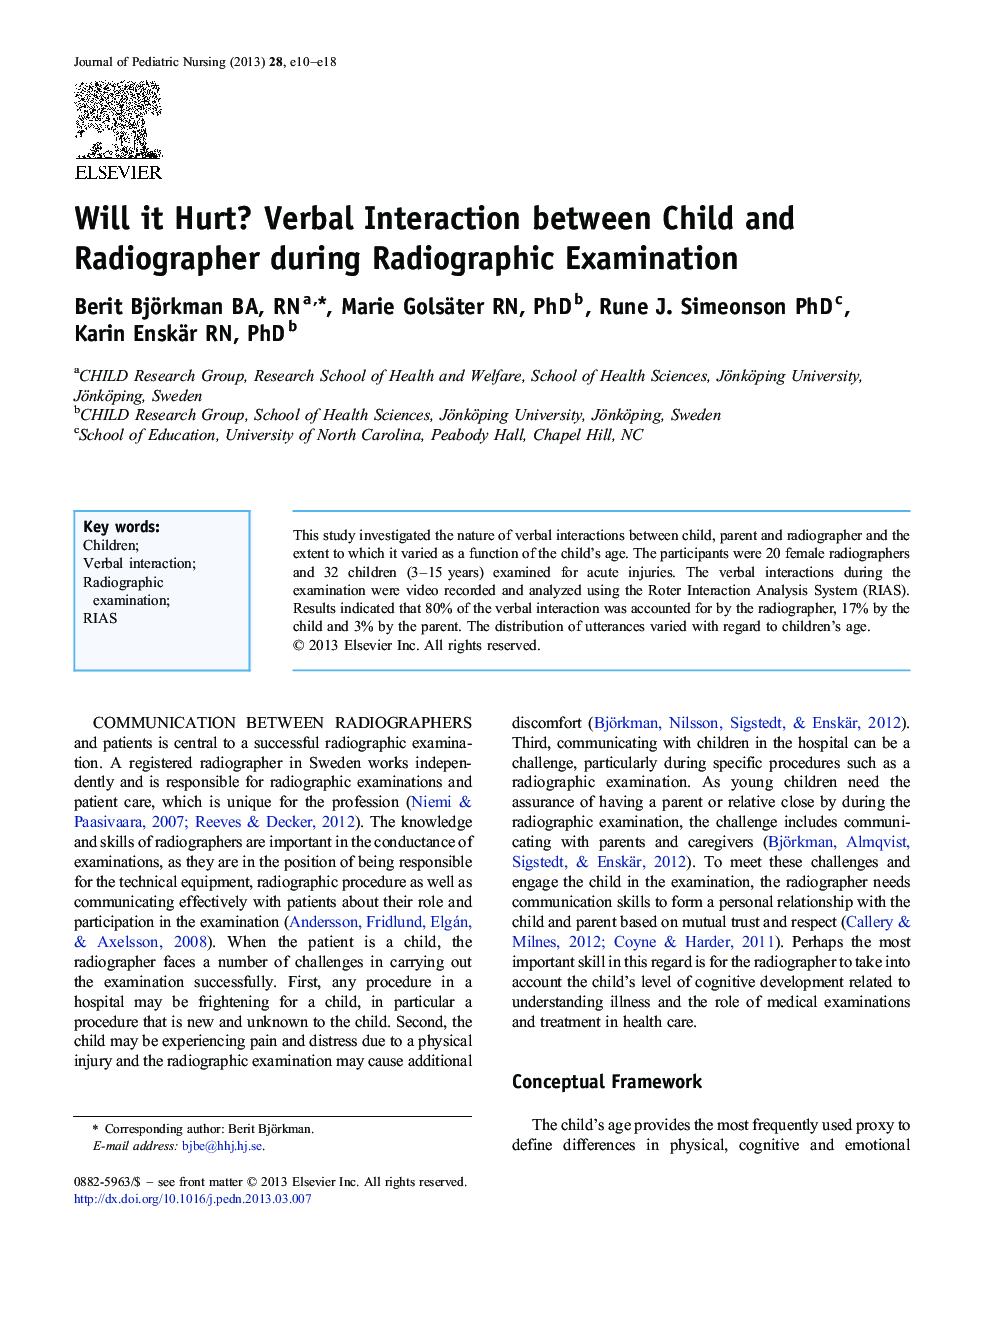 Will it Hurt? Verbal Interaction between Child and Radiographer during Radiographic Examination